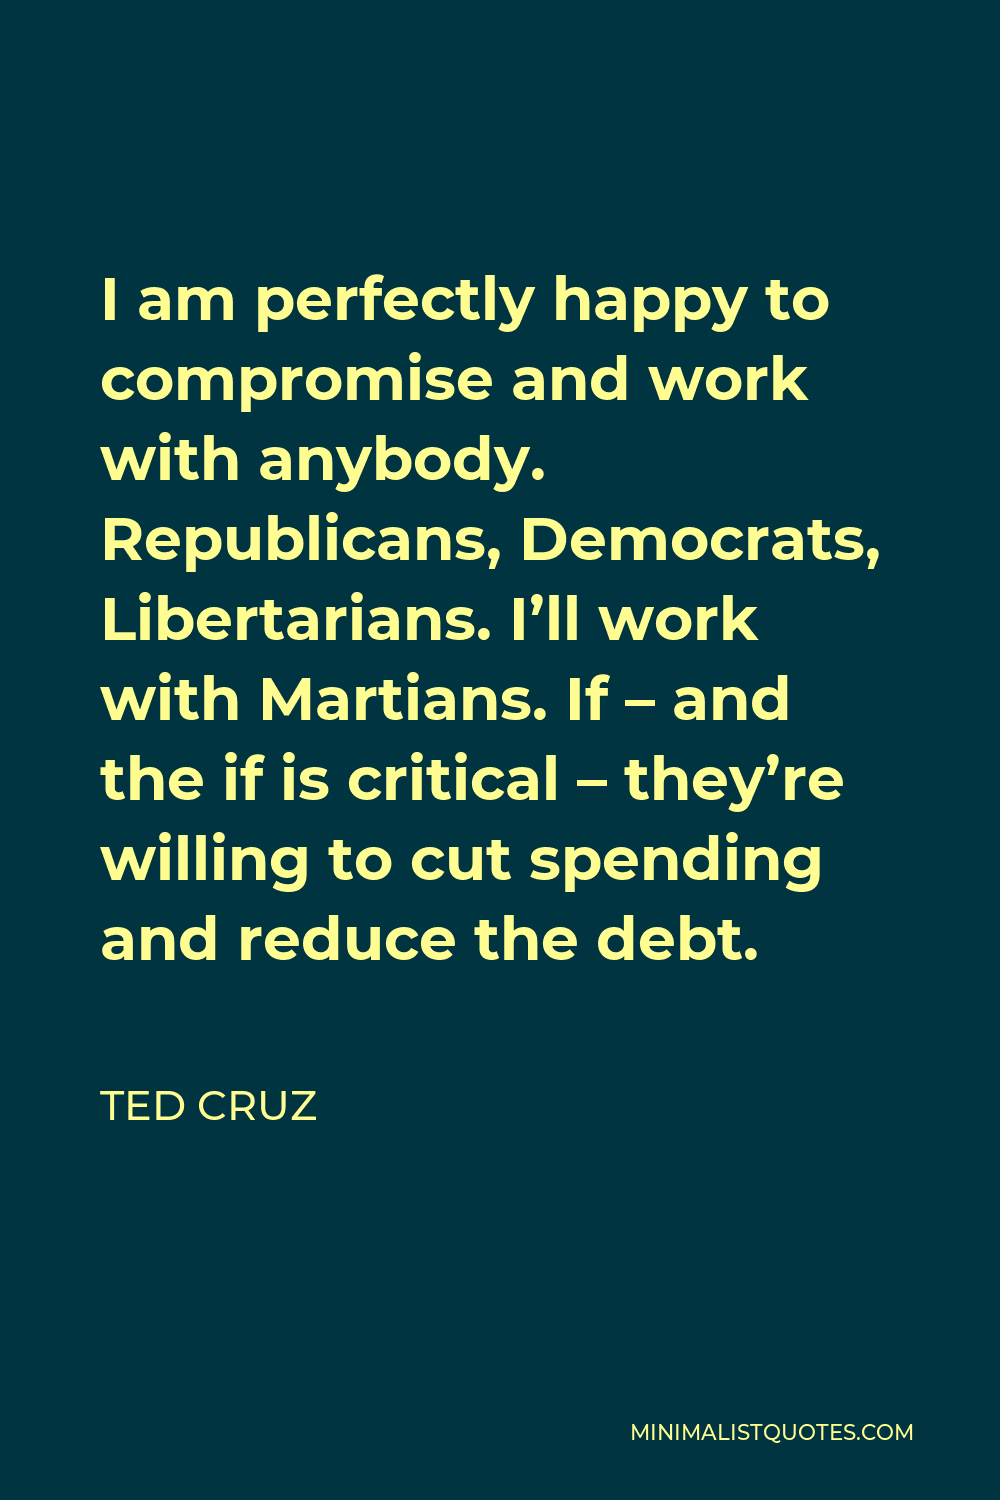 Ted Cruz Quote - I am perfectly happy to compromise and work with anybody. Republicans, Democrats, Libertarians. I’ll work with Martians. If – and the if is critical – they’re willing to cut spending and reduce the debt.